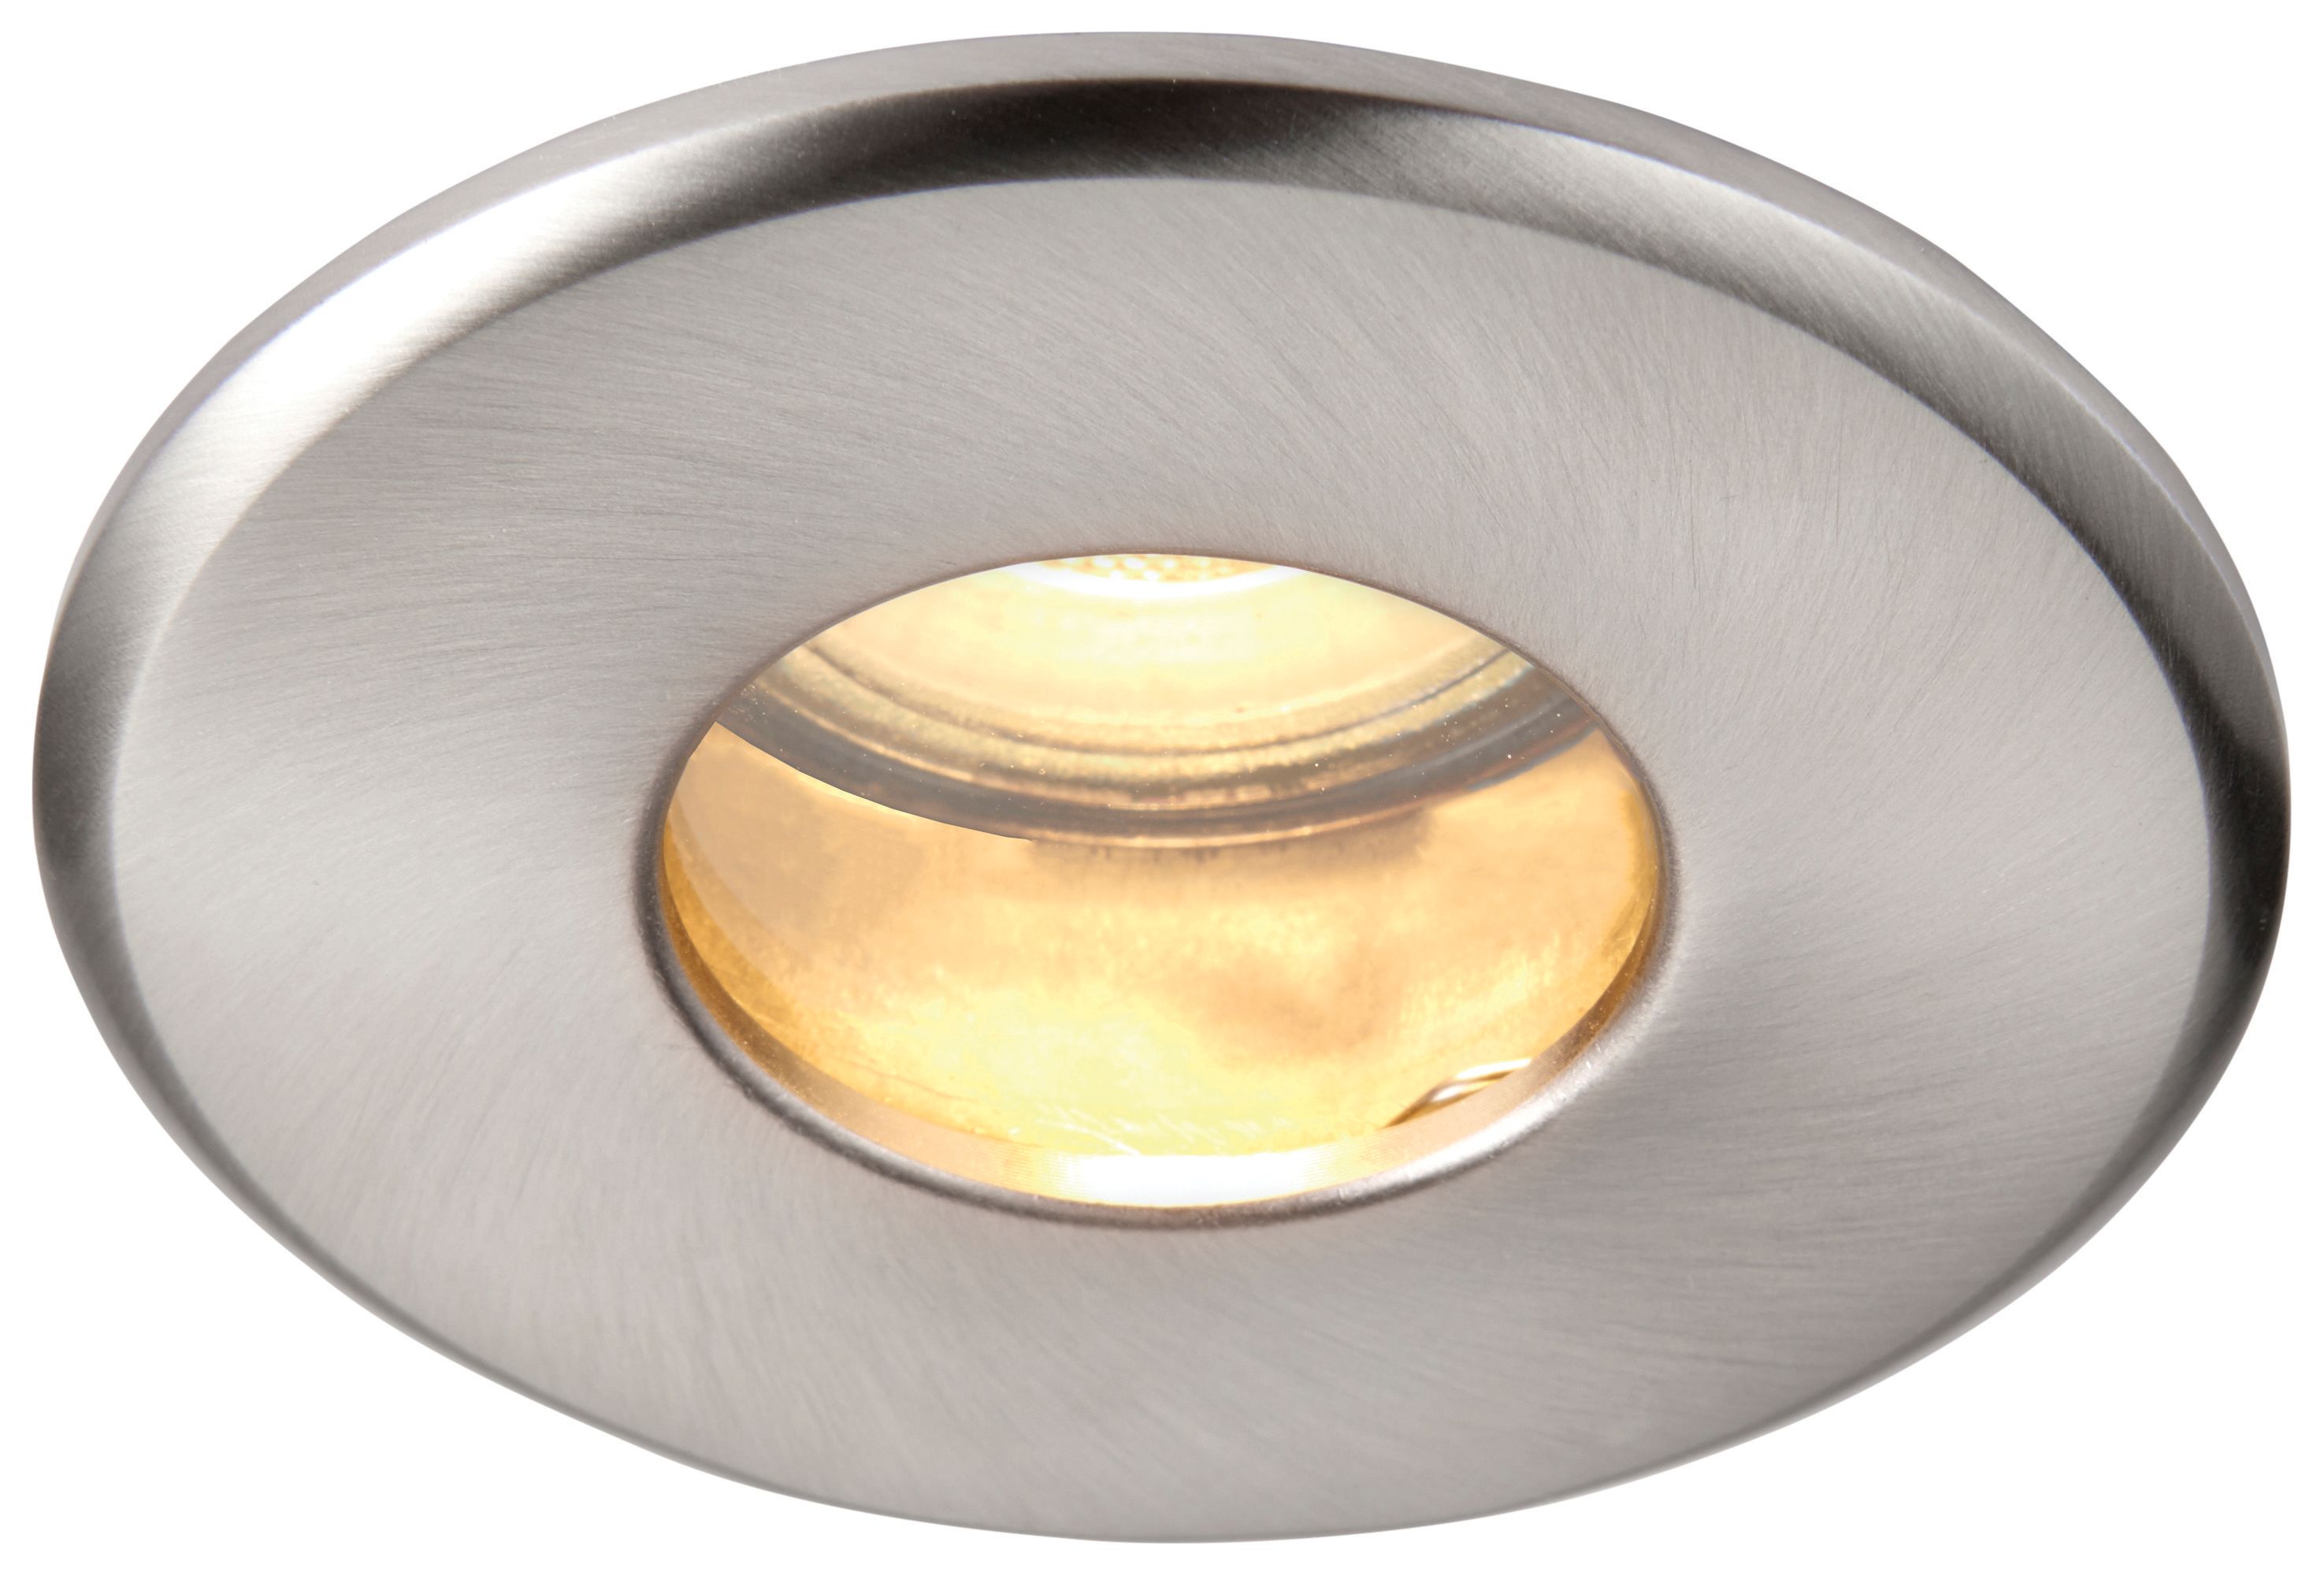 Image of Saxby GU10 Satin Nickel Fire Rated IP65 Cast Fixed Downlight - 50W